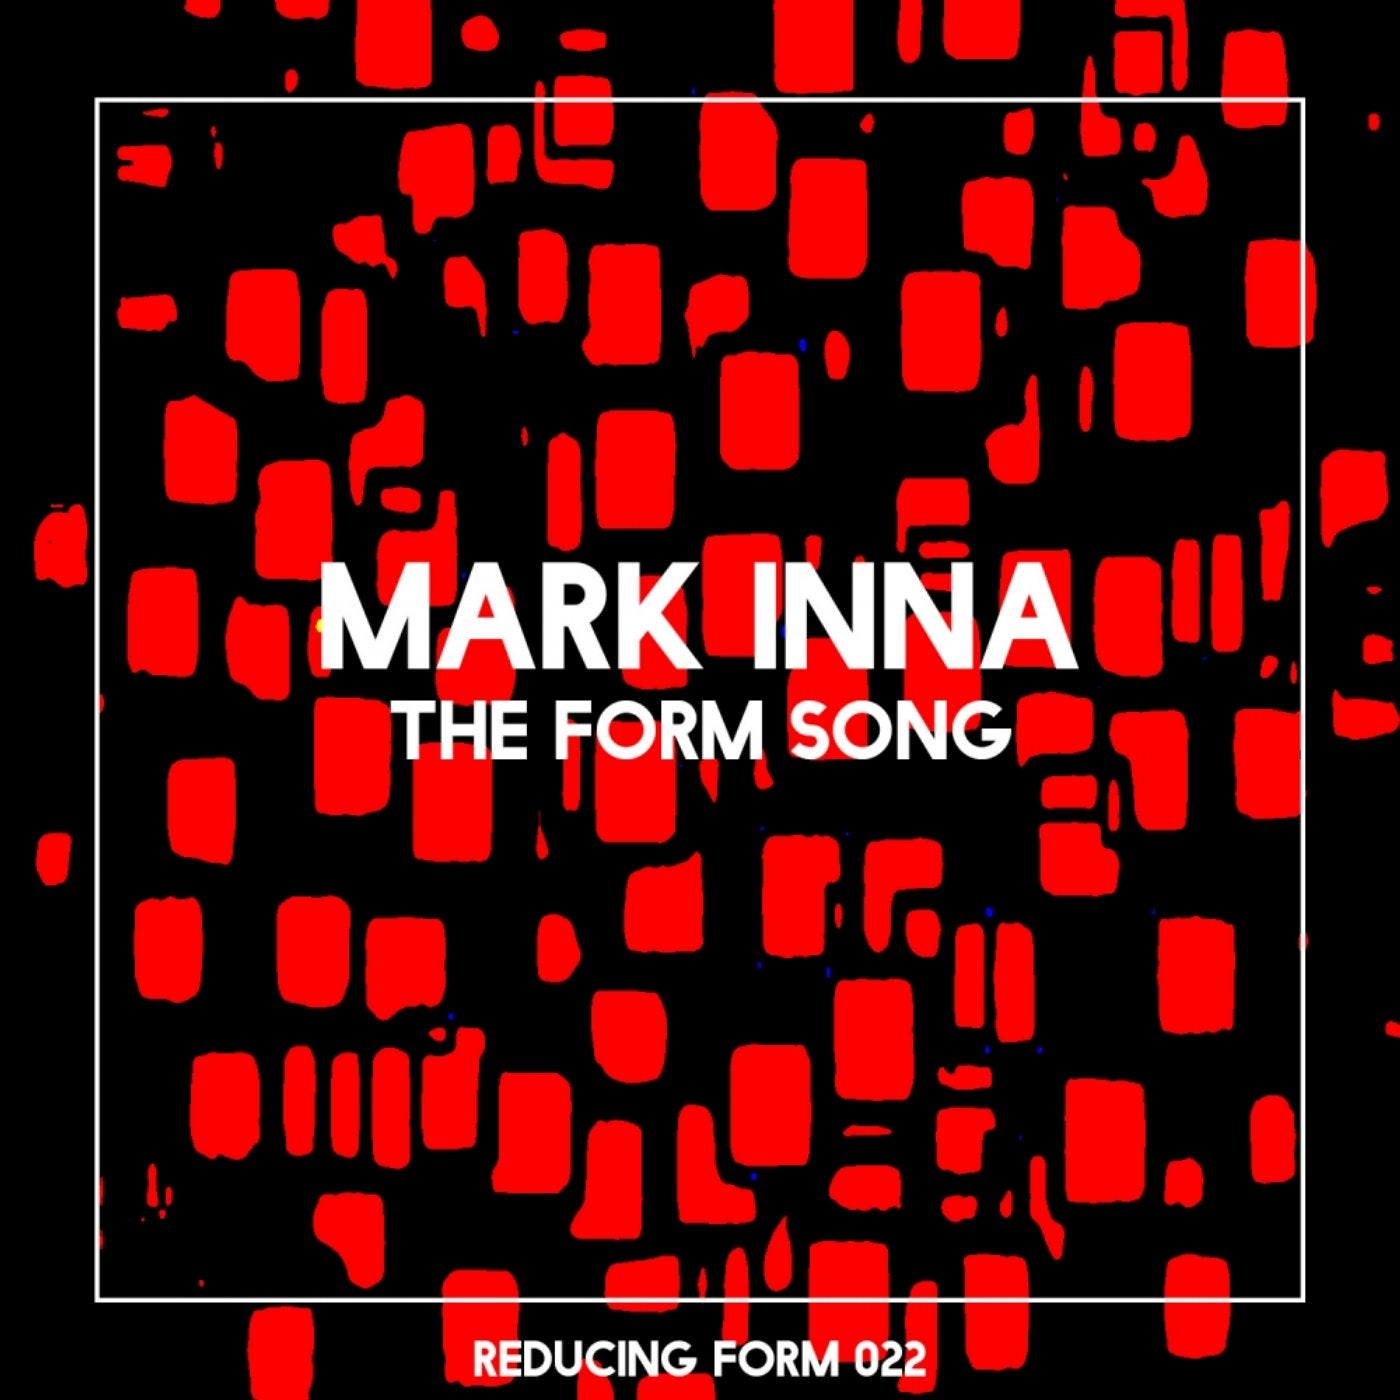 The Form Song